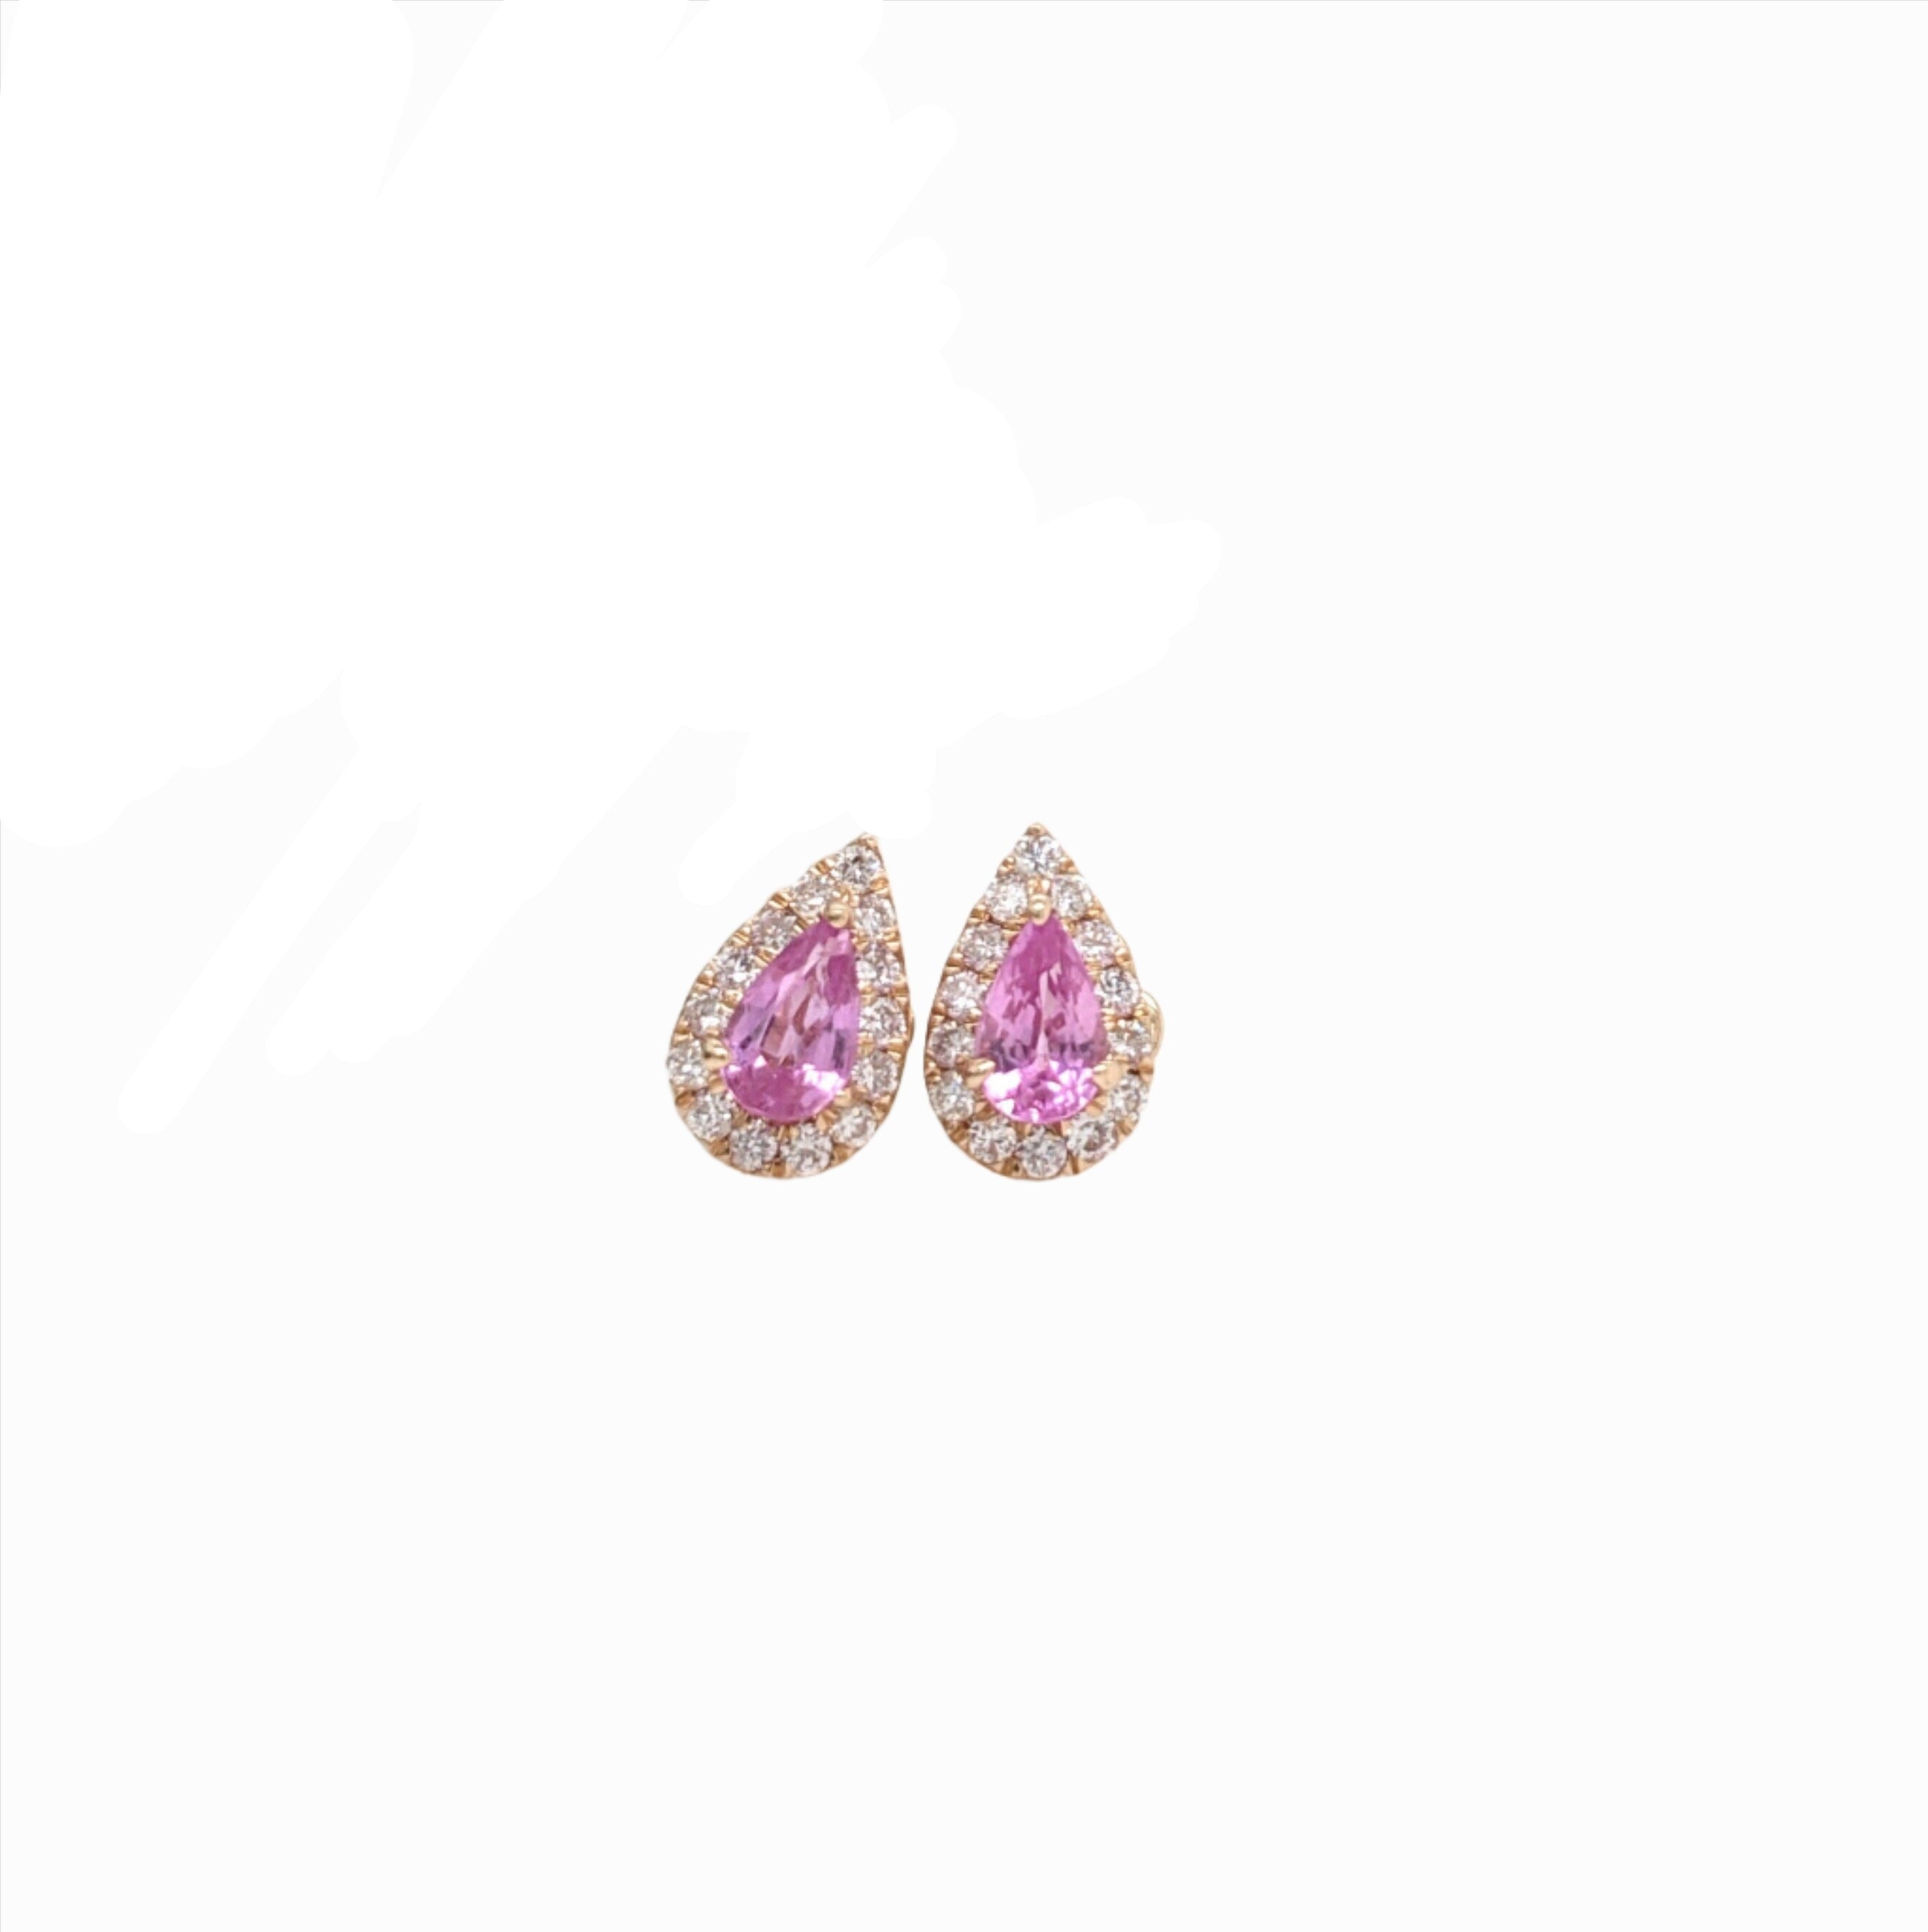 Stud Earrings-Petite Baby Pink Sapphire Earring Studs in 14k Yellow Gold with Diamond Halo | September Birthstone | Secure Push Backs | Pear Shape 5x3mm - NNJGemstones